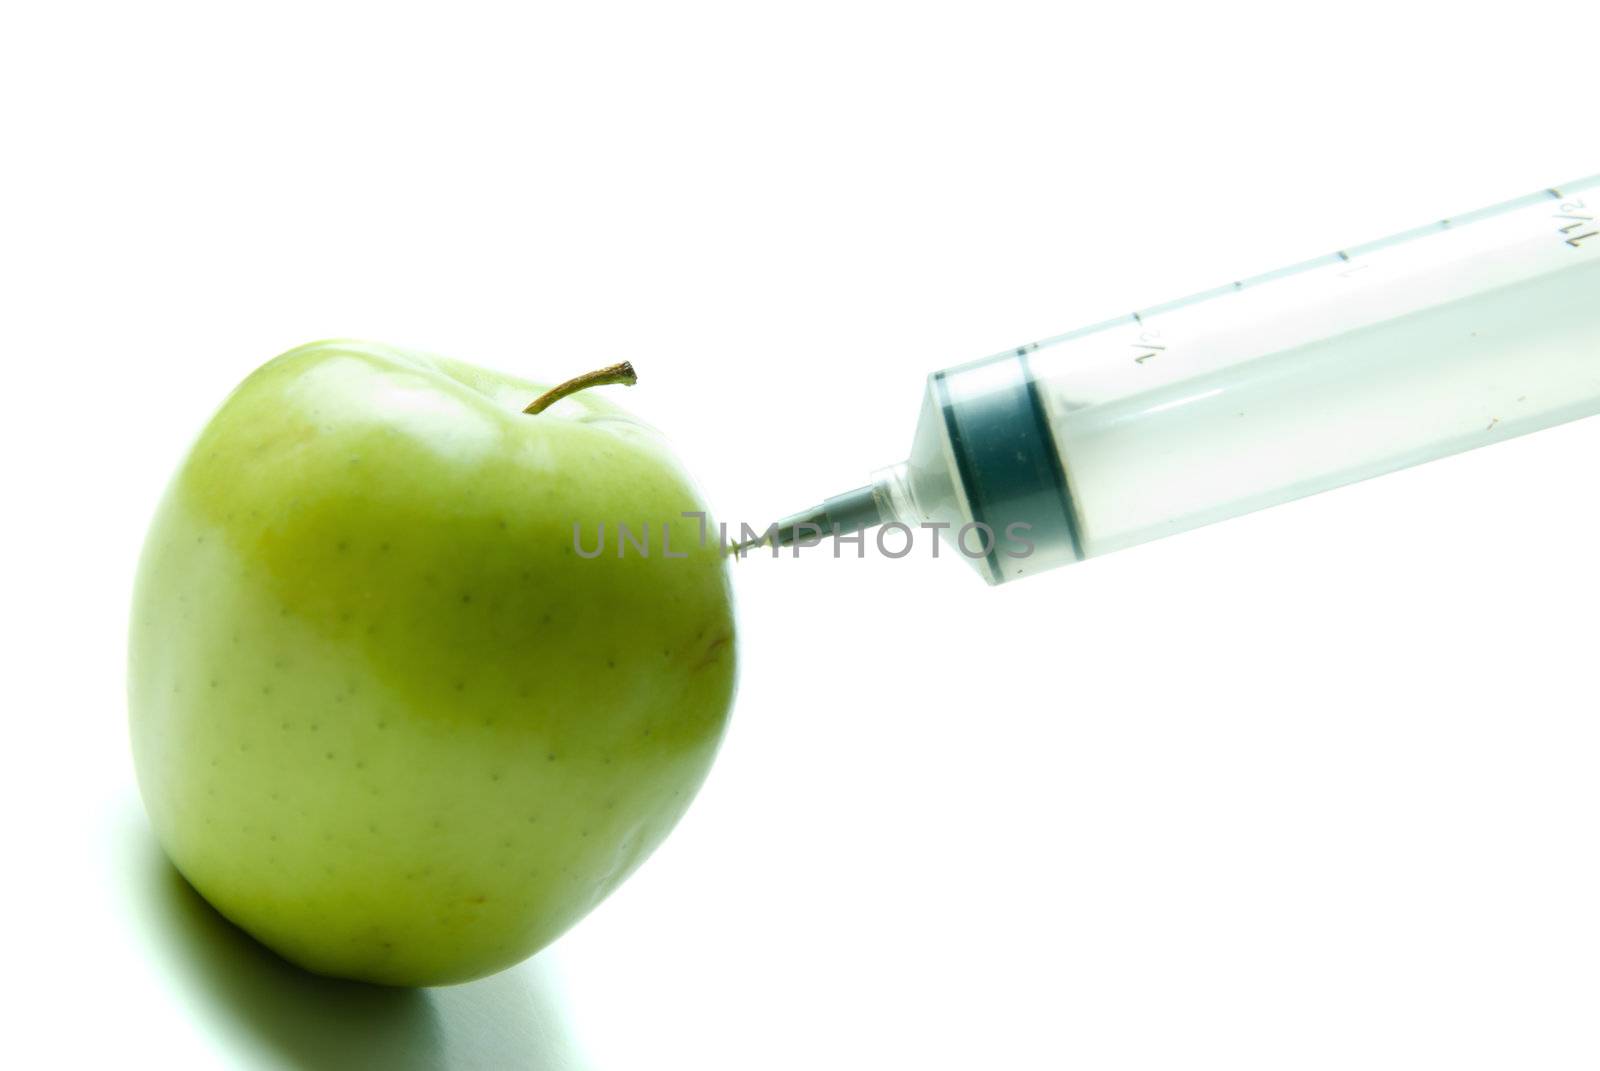 Concept image of a syringe injecting additional vitamins into food, shot on a white background.